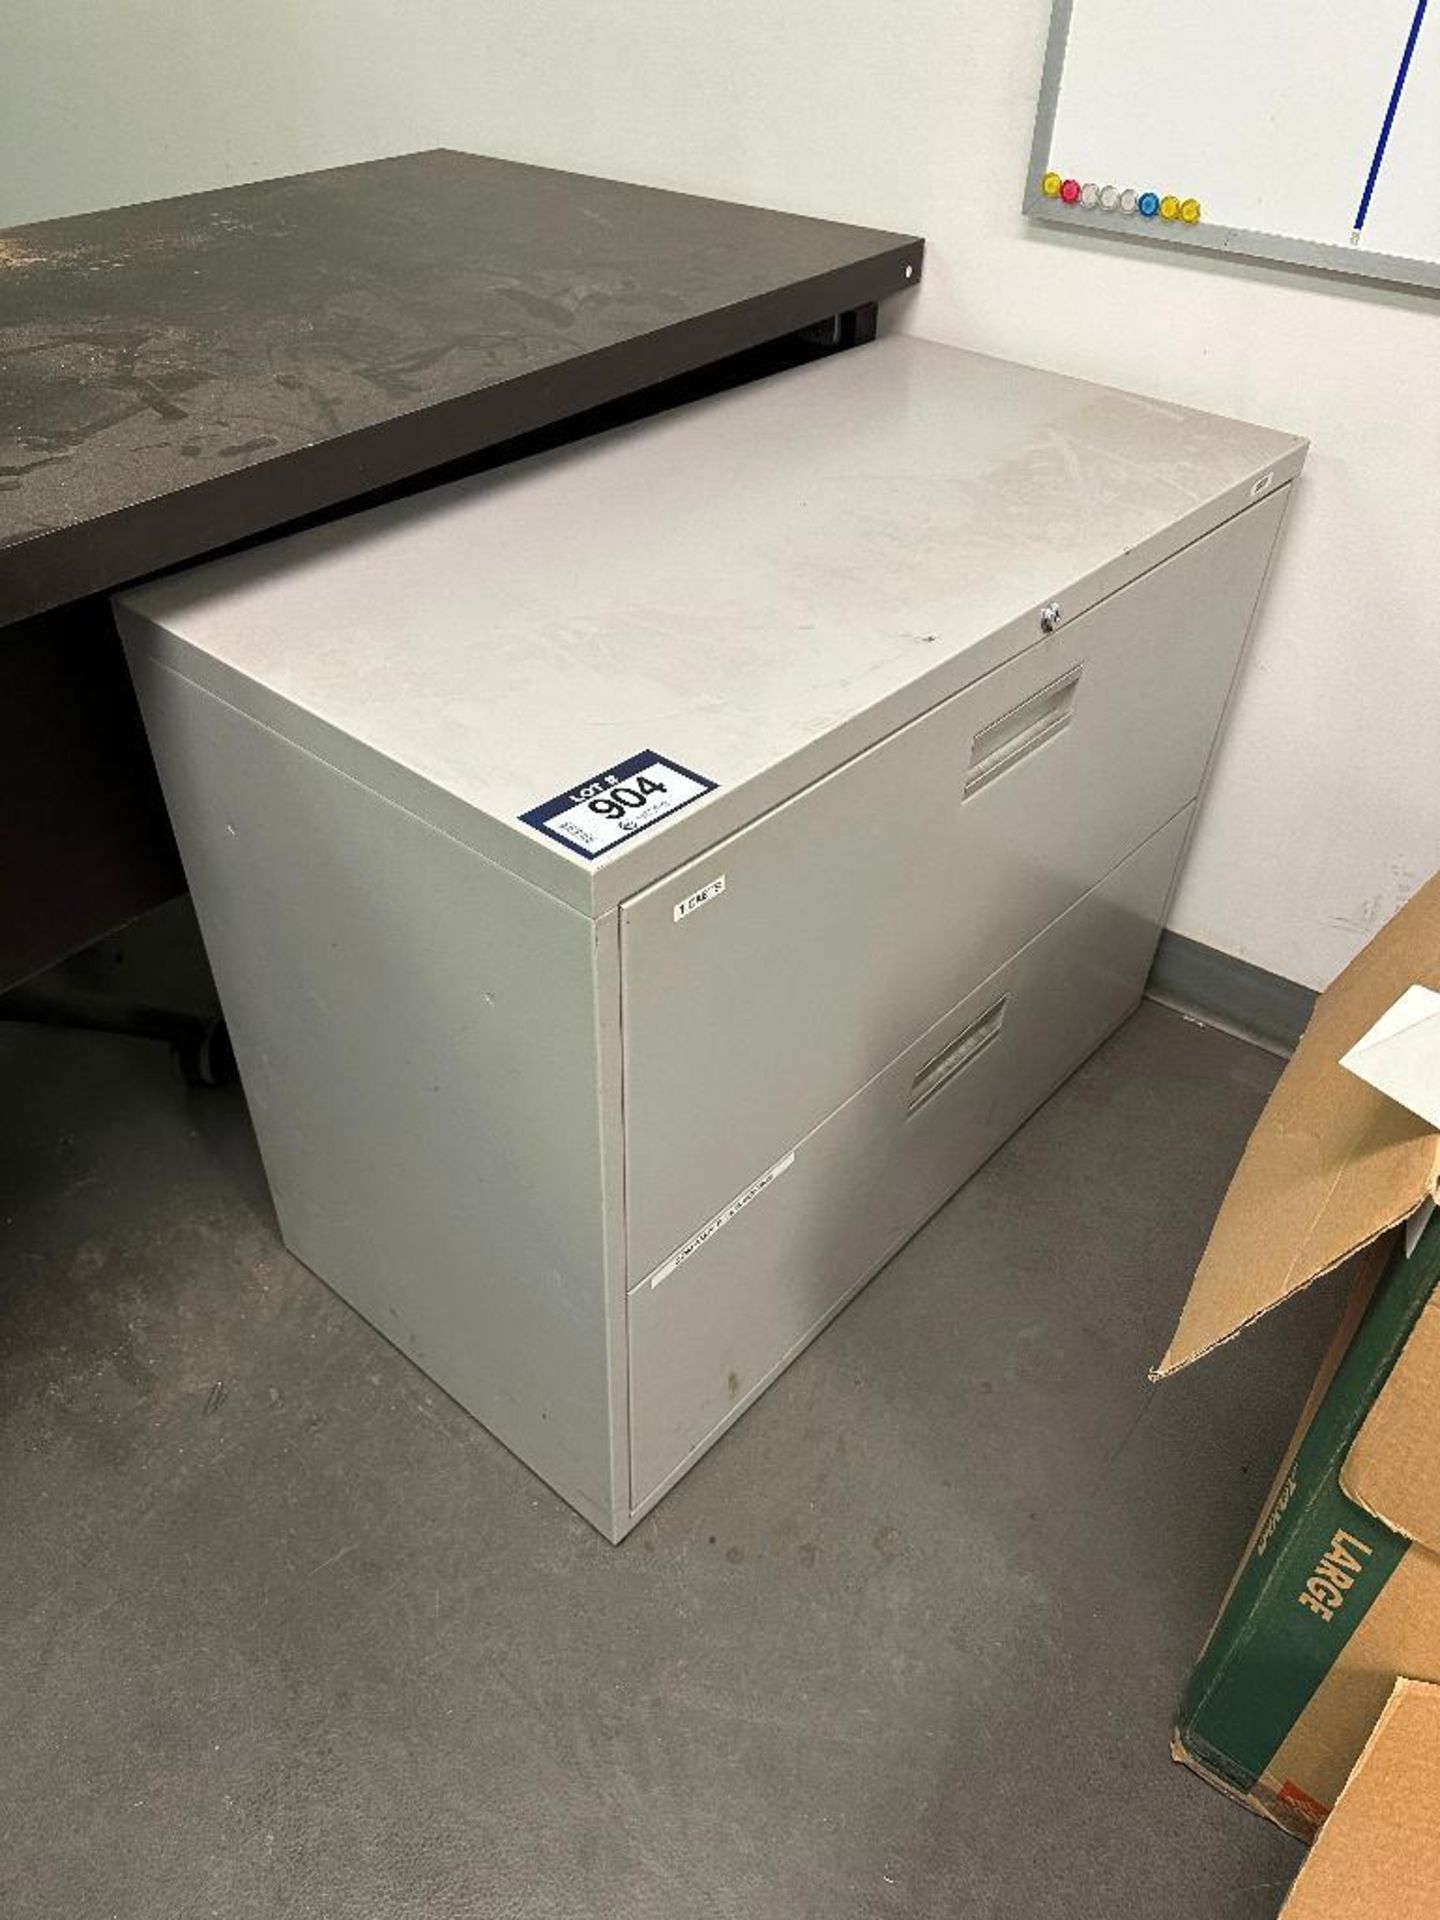 2-Drawer Lateral Filing Cabinet - Image 2 of 2